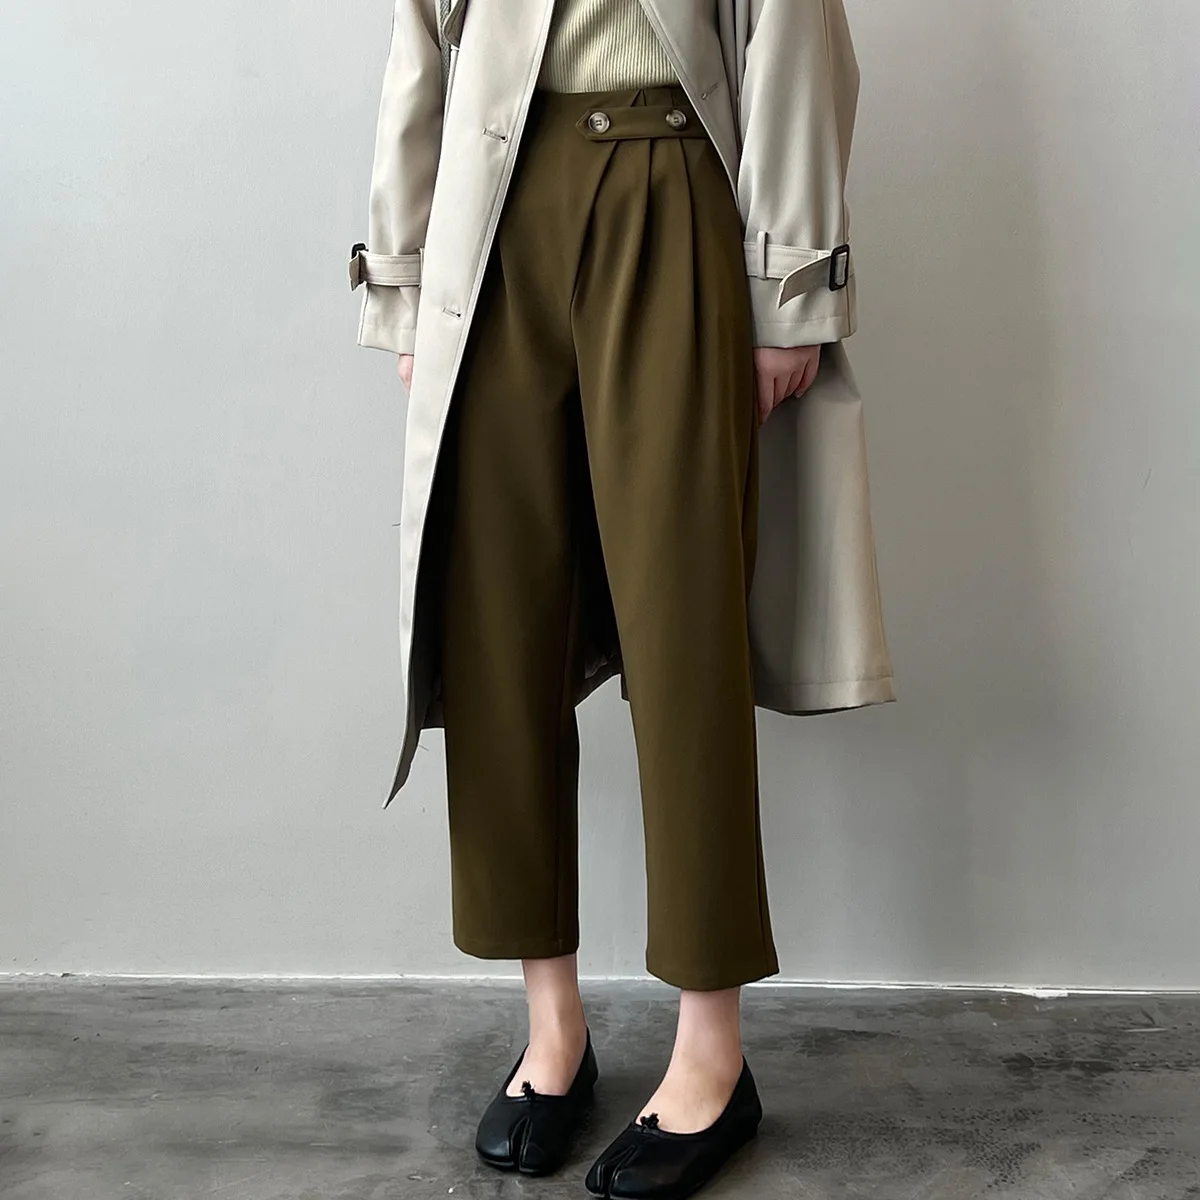 

Mustard Green Harem Pants Women Autumn Office Wear Ankle-Length Suit Pants Loose High Waist Pleated Trousers Army Green Pants